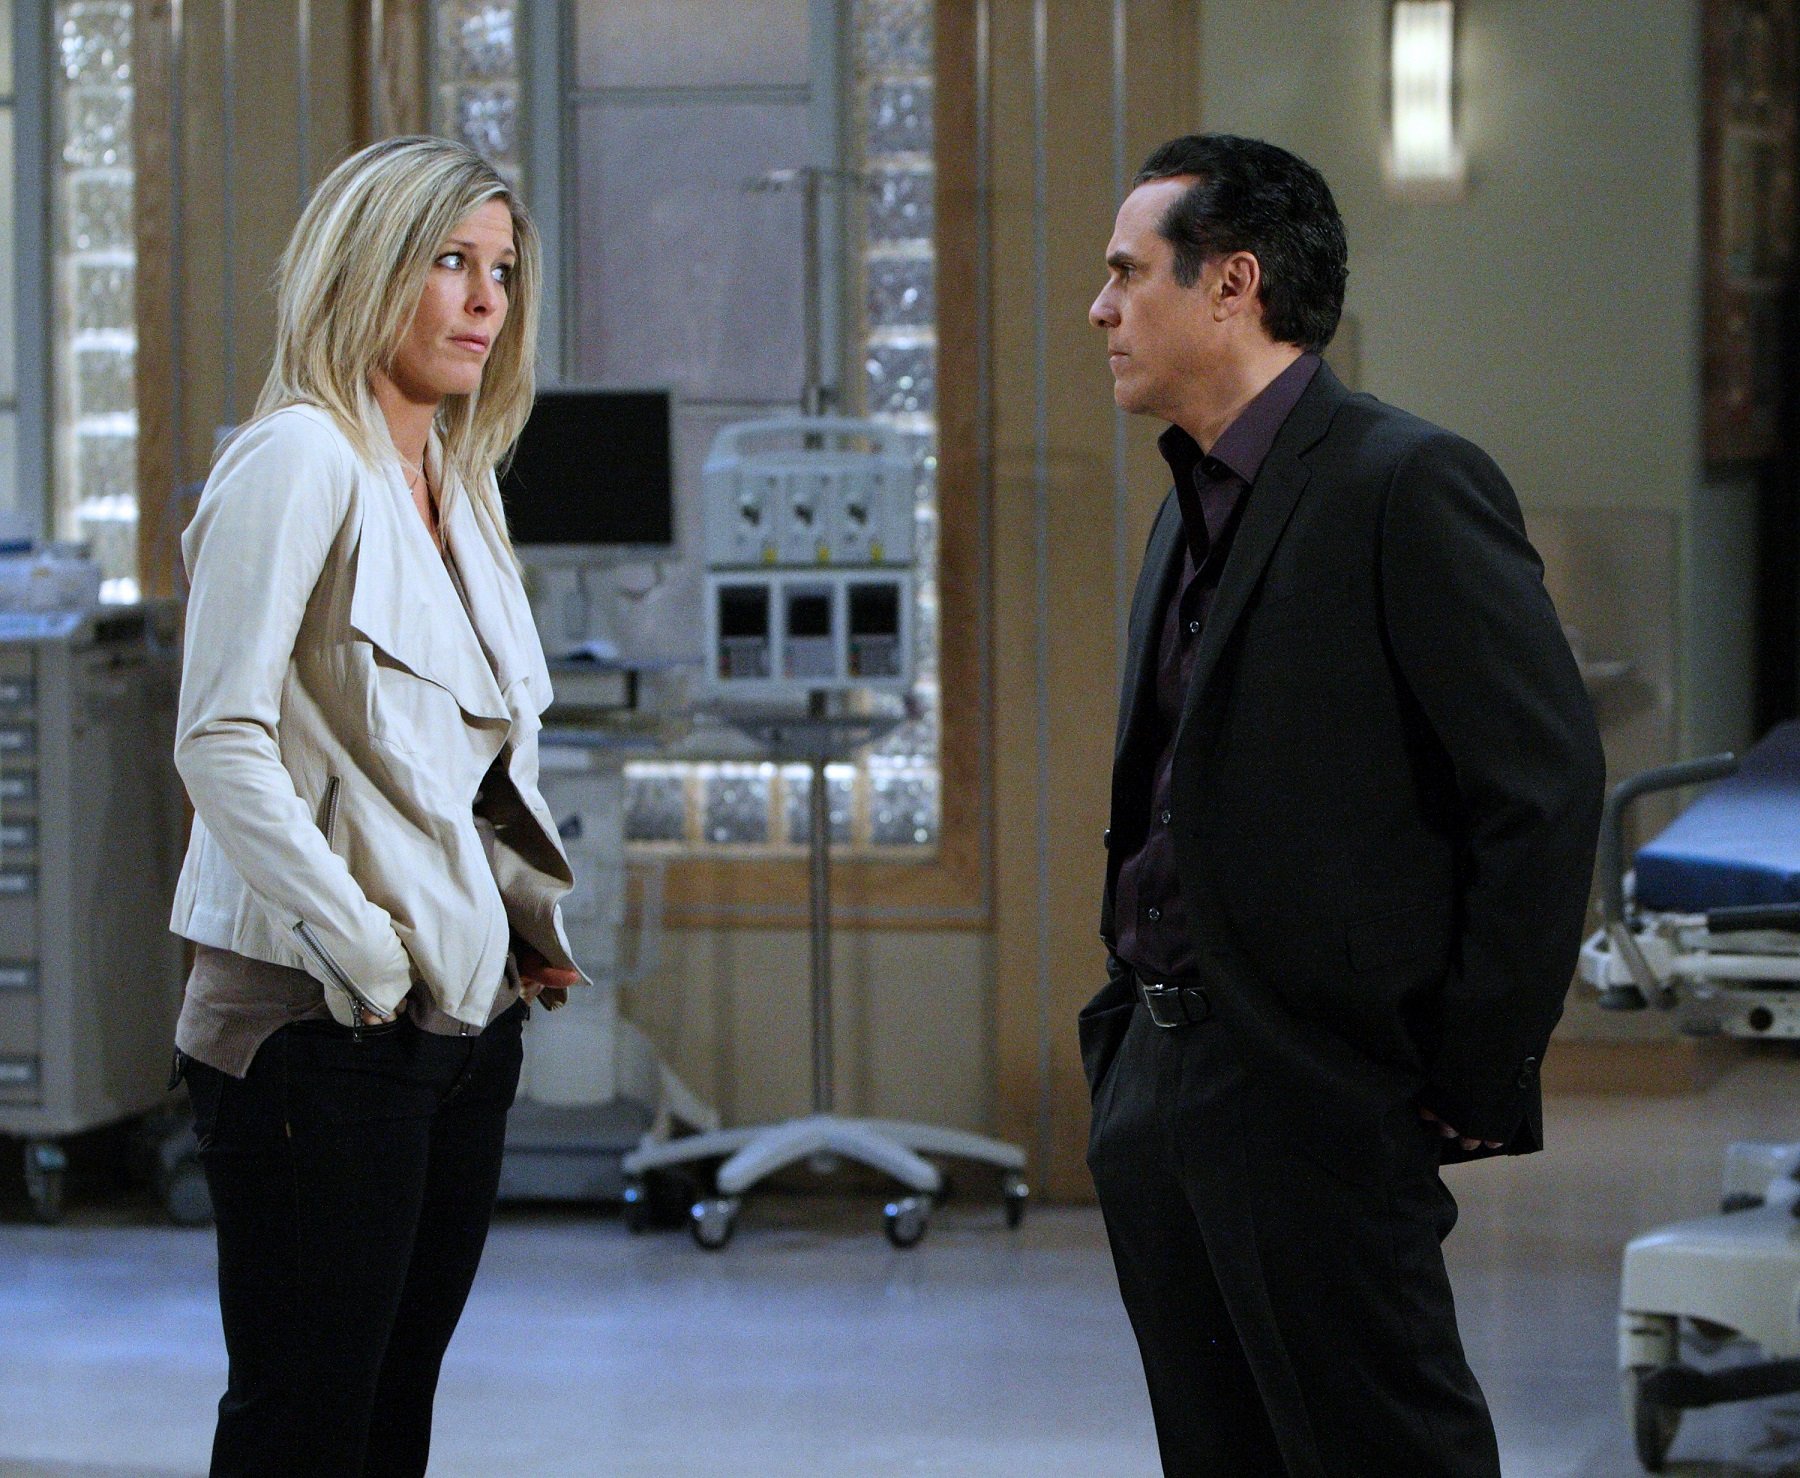 General Hospital speculation focuses on Carly, pictured here in a white jacket and black pants, and Sonny, pictured here in a black suit